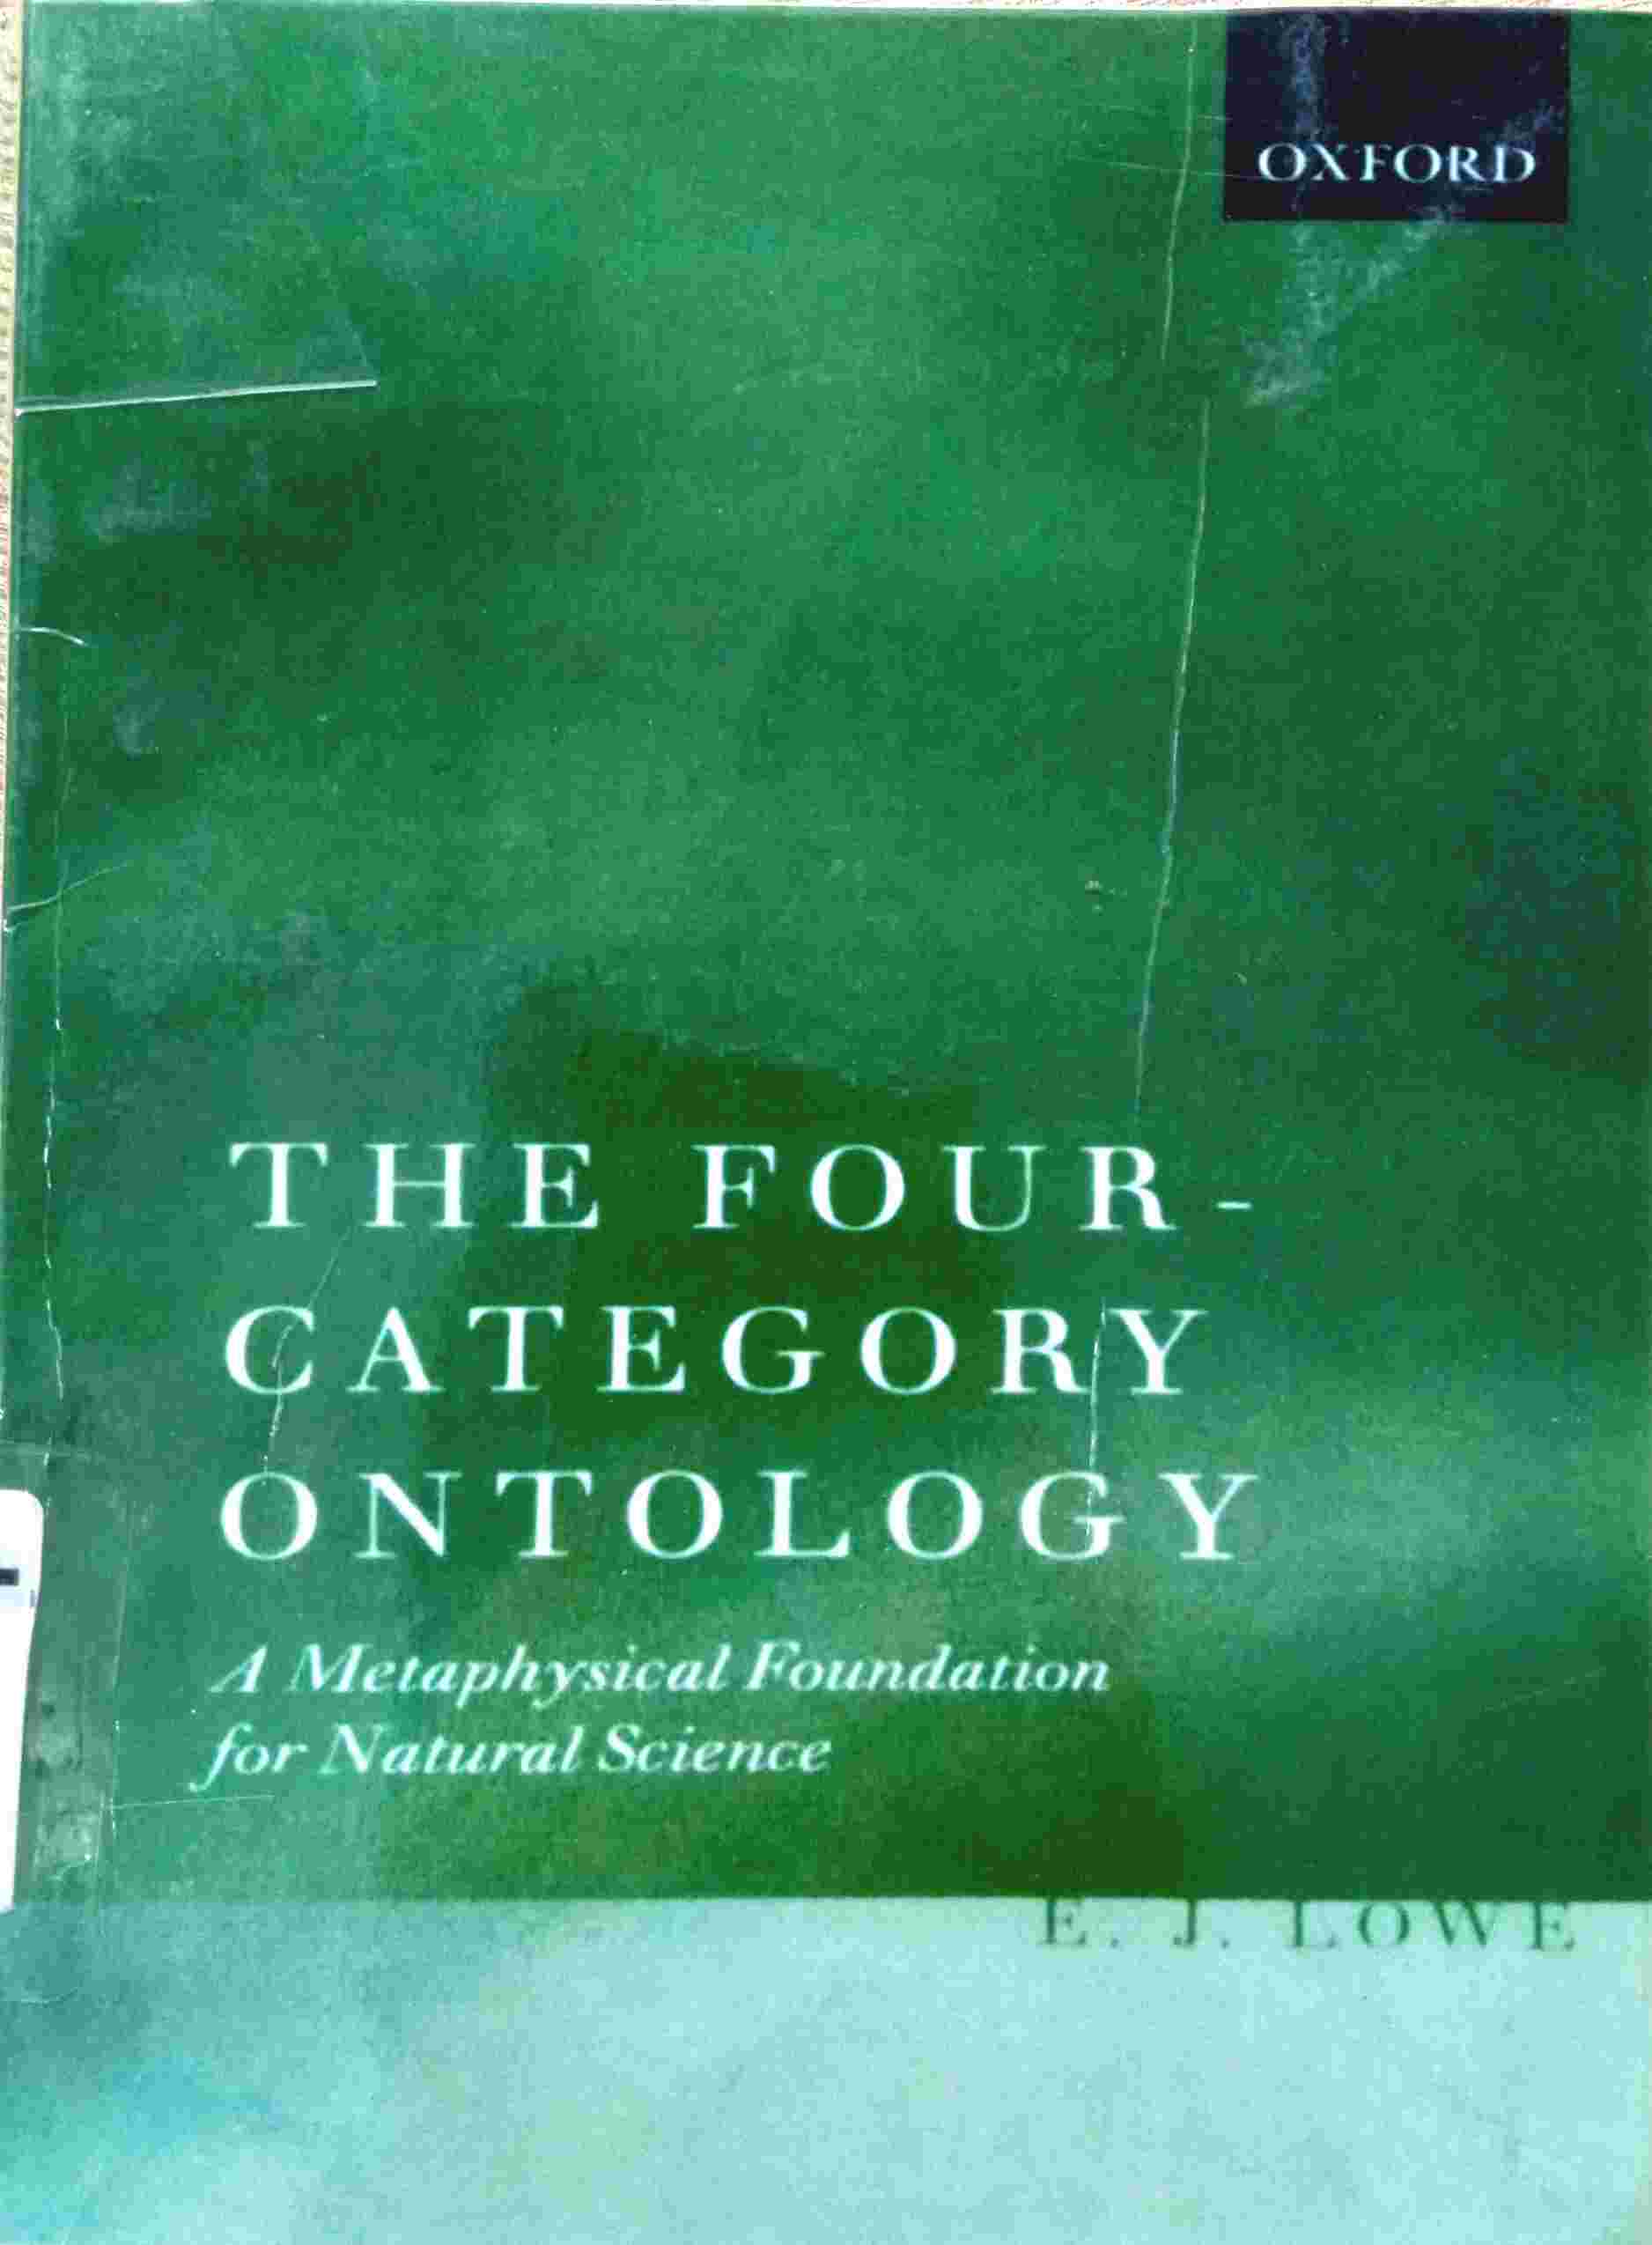 THE FOUR-CATEGORY ONTOLOGY